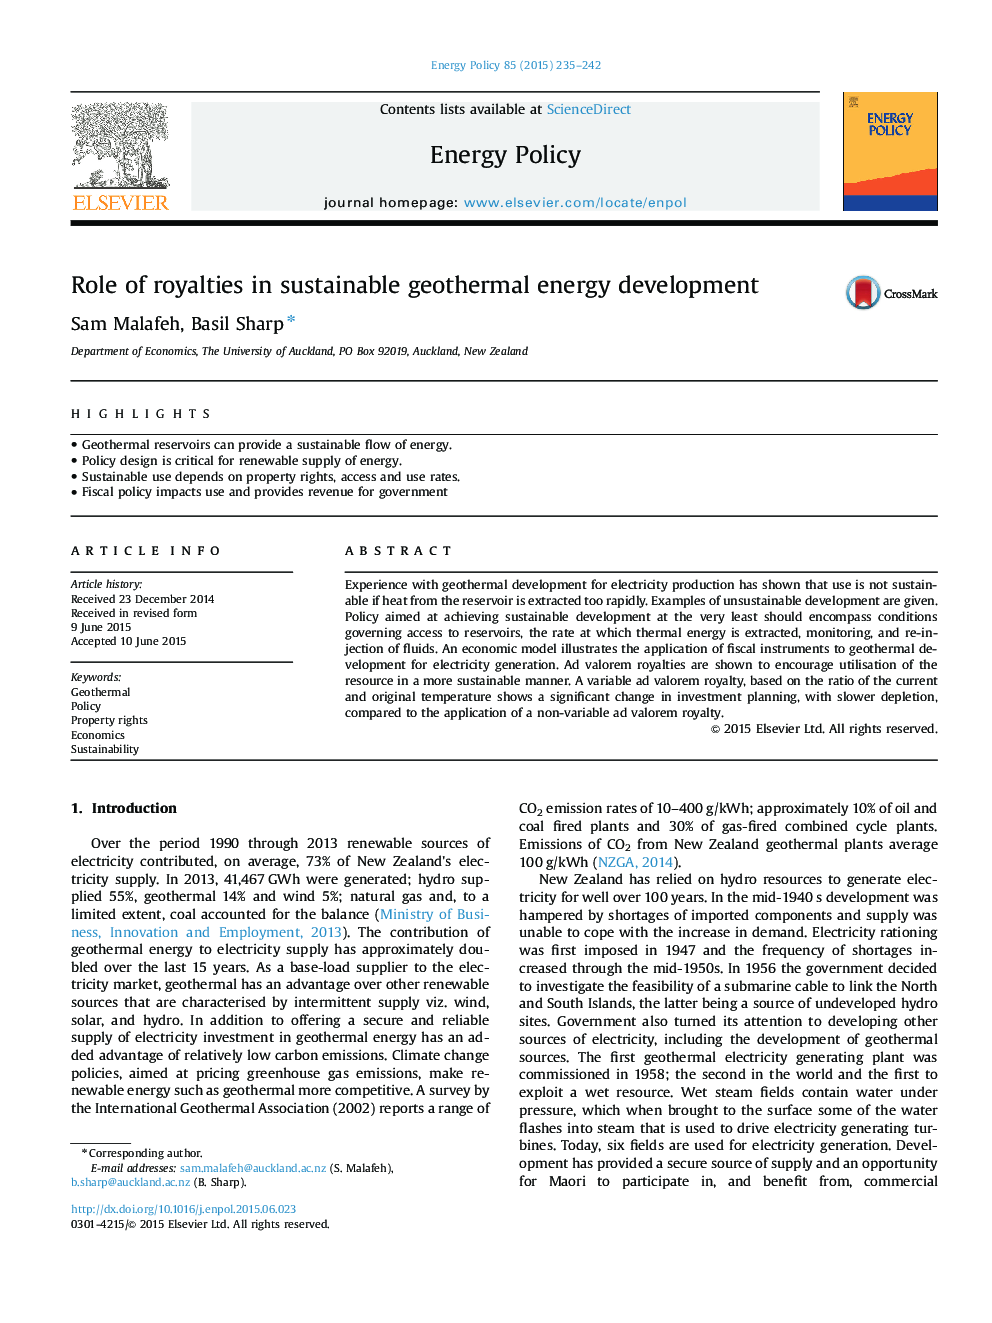 Role of royalties in sustainable geothermal energy development